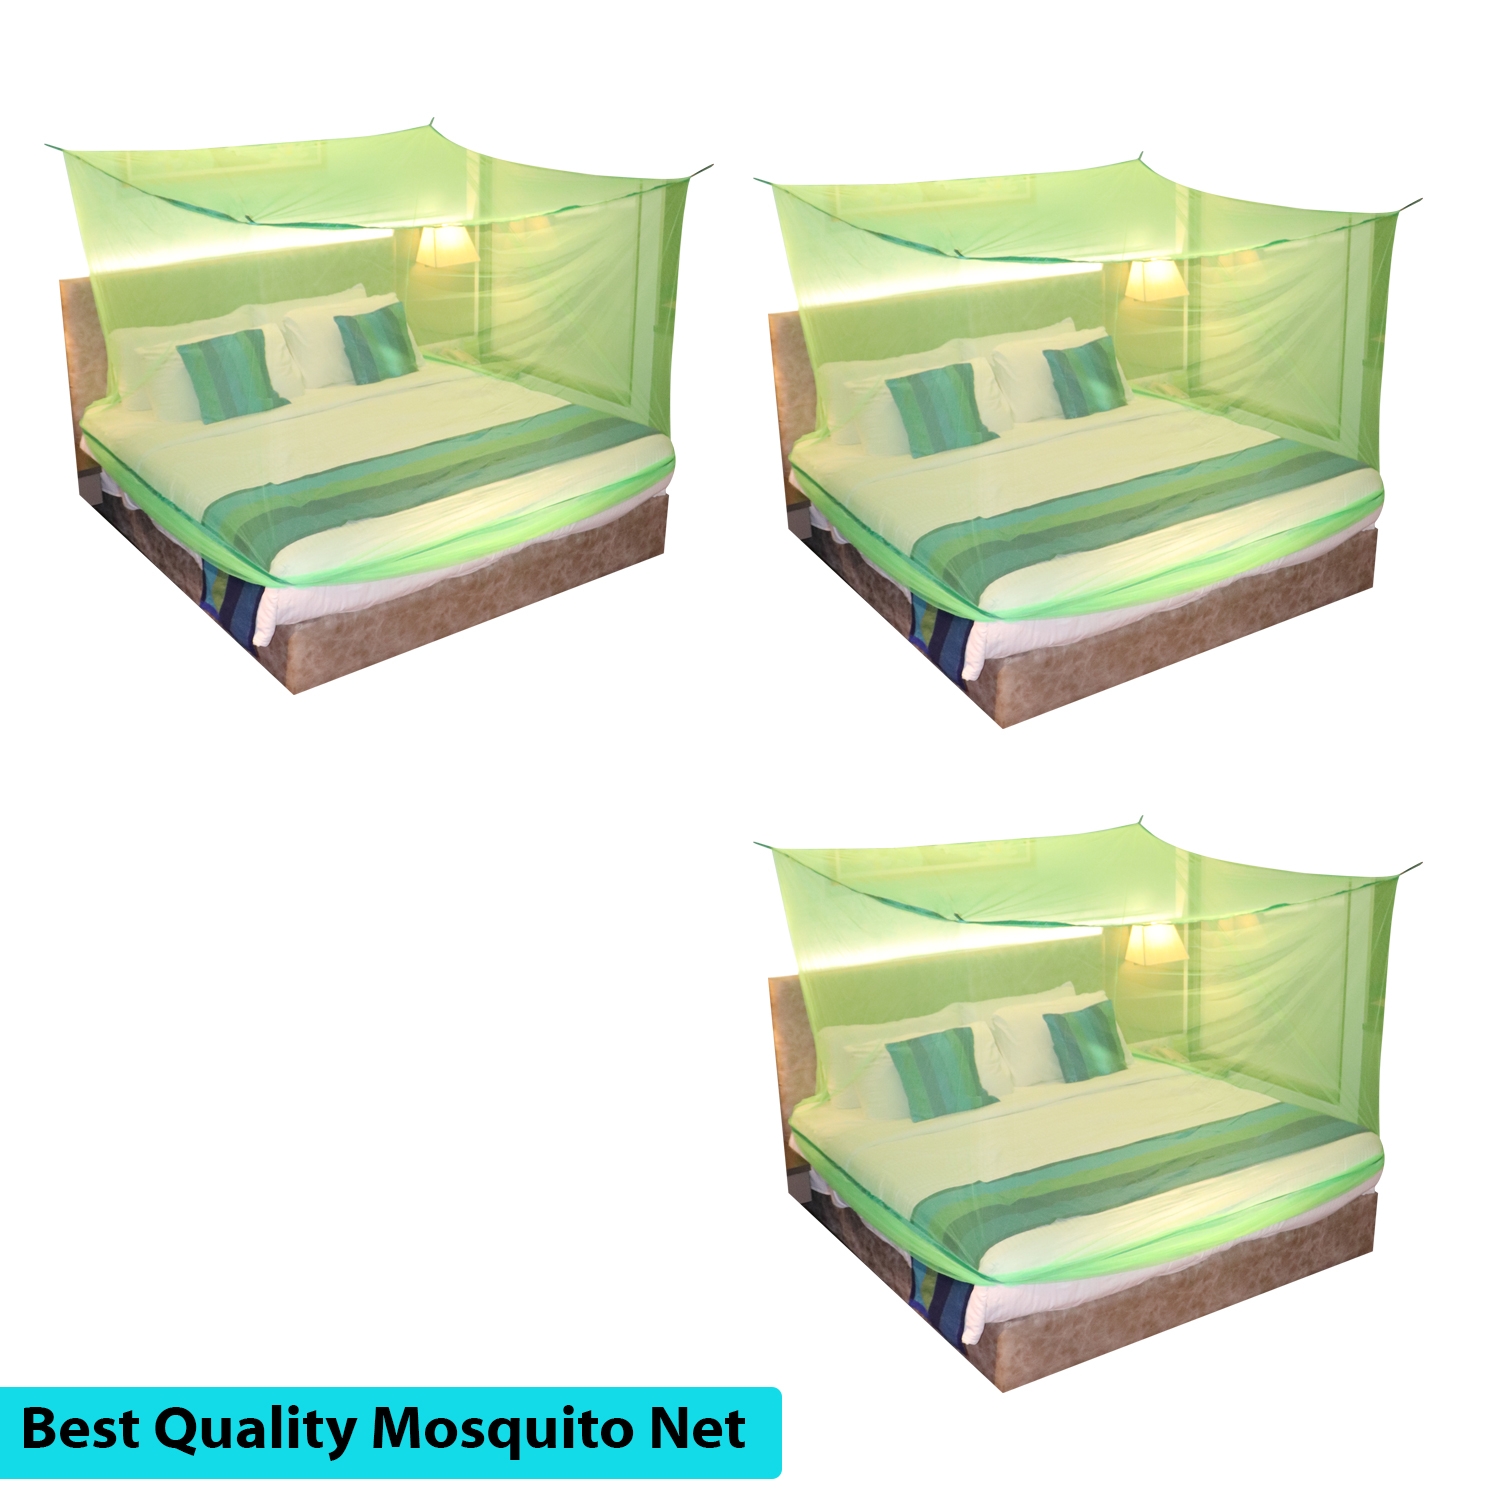 Paola Jewels | Mosquito Net for Double Bed, King-Size, Square Hanging Foldable Polyester Net Green Pack of 3